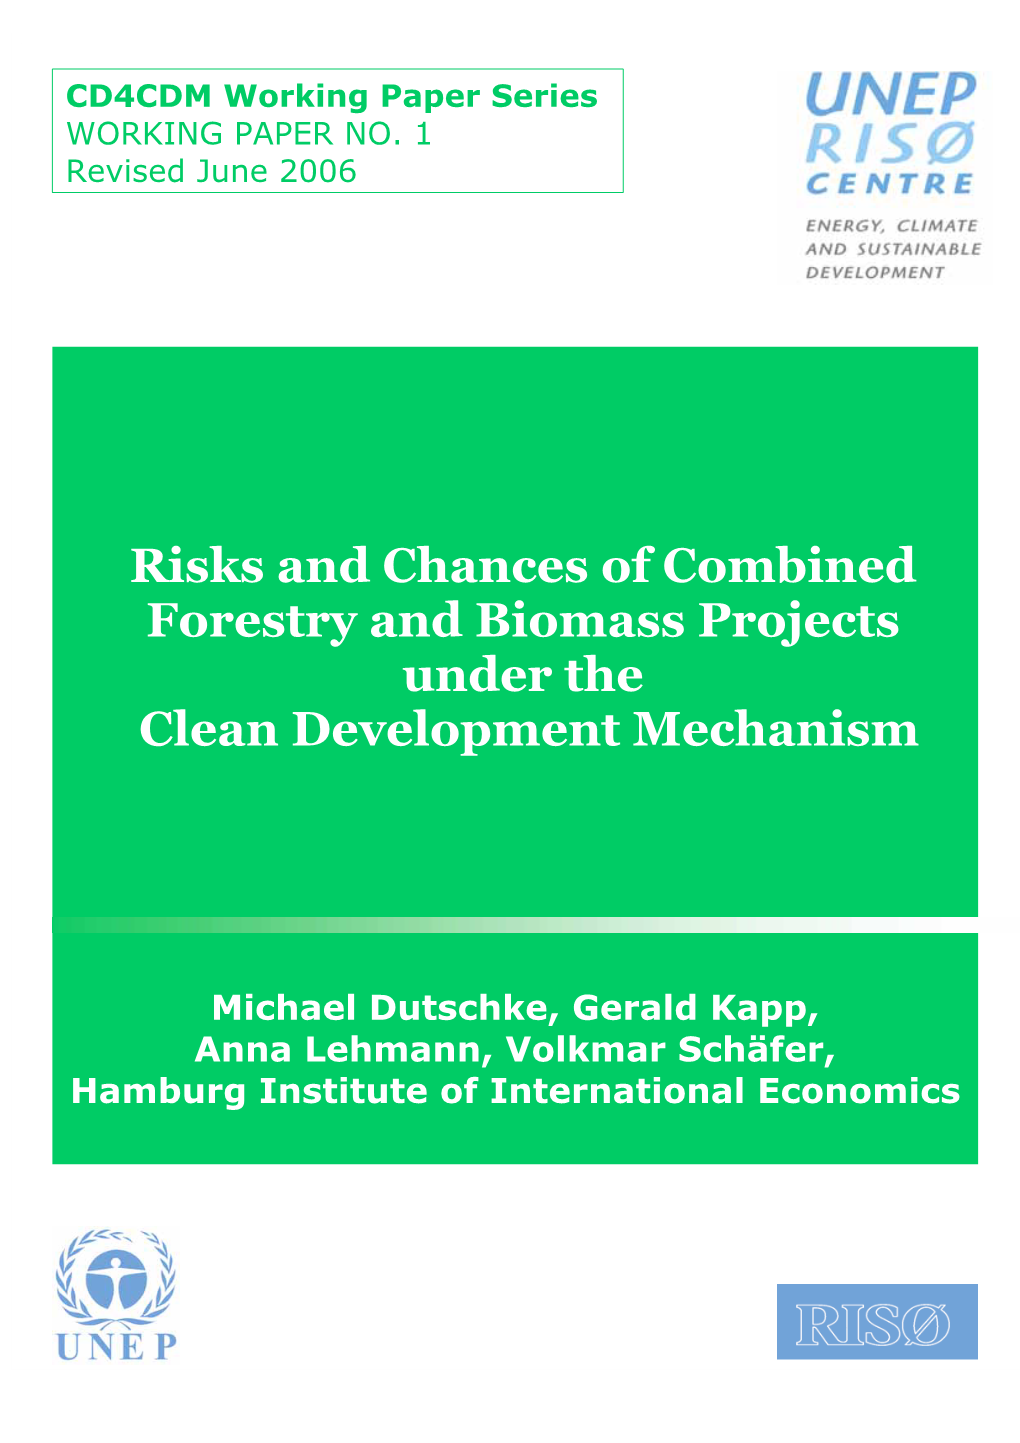 Risks and Chances of Combined Forestry and Biomass Projects Under the Clean Development Mechanism